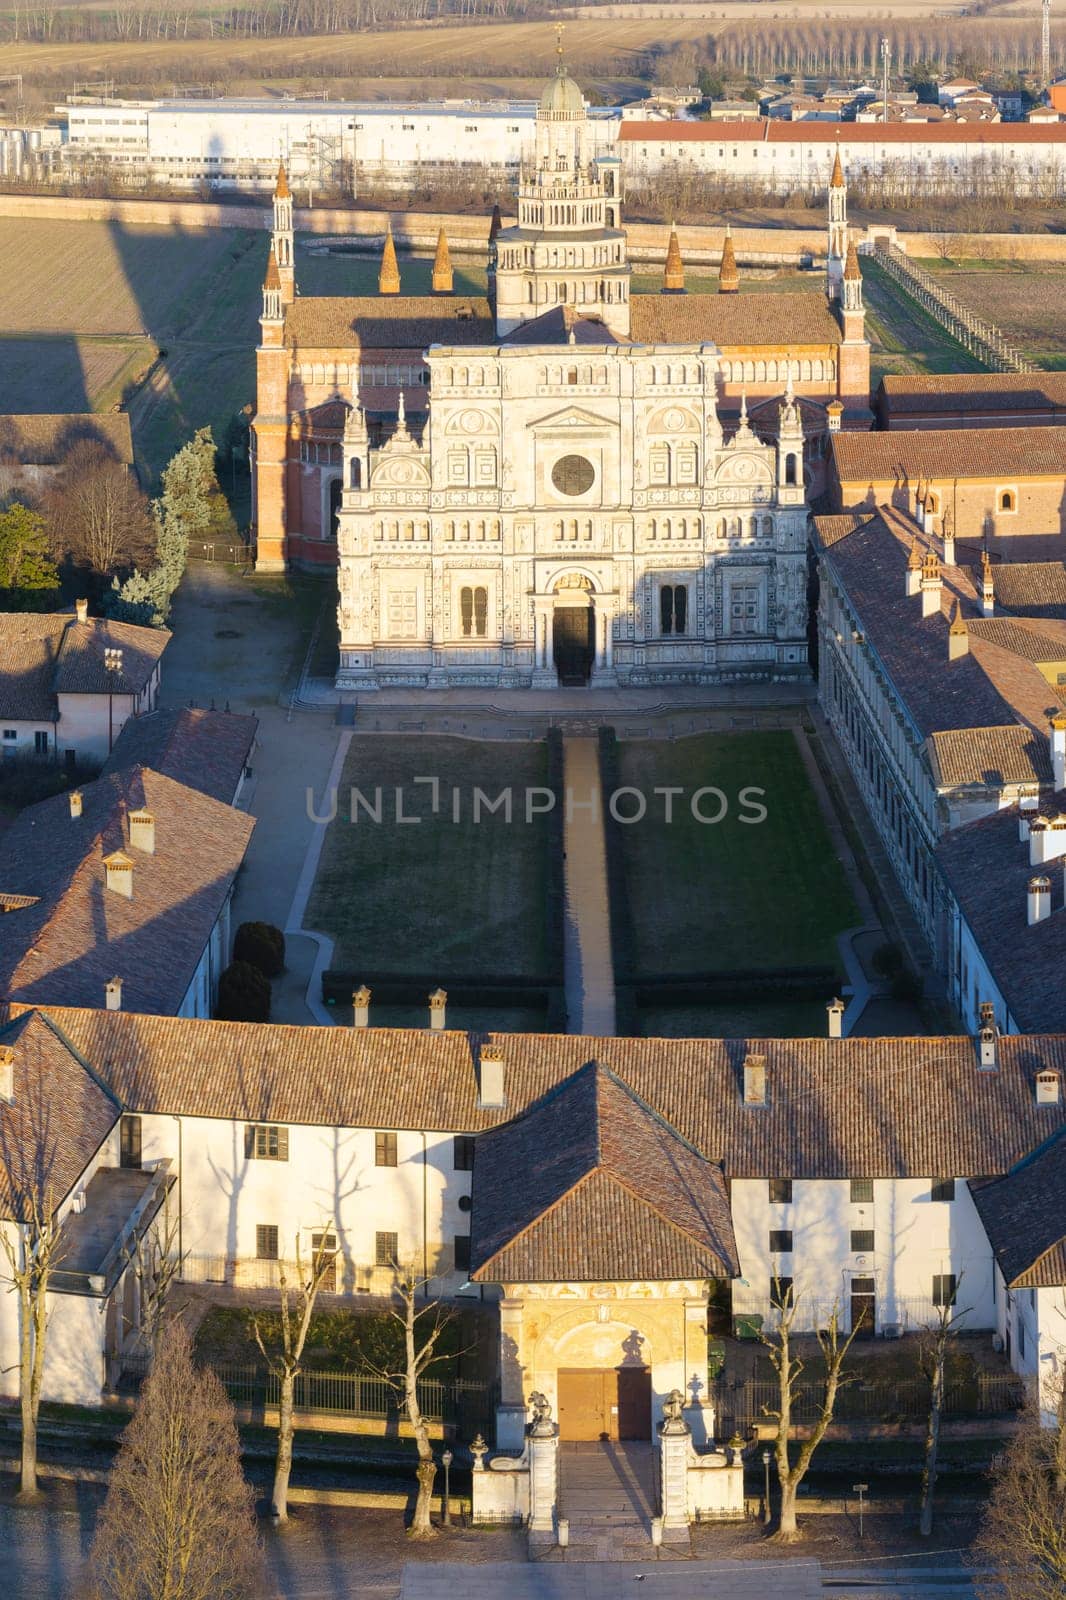 Drone view over Certosa di Pavia monastery with lawn fields in Italy, Pavia